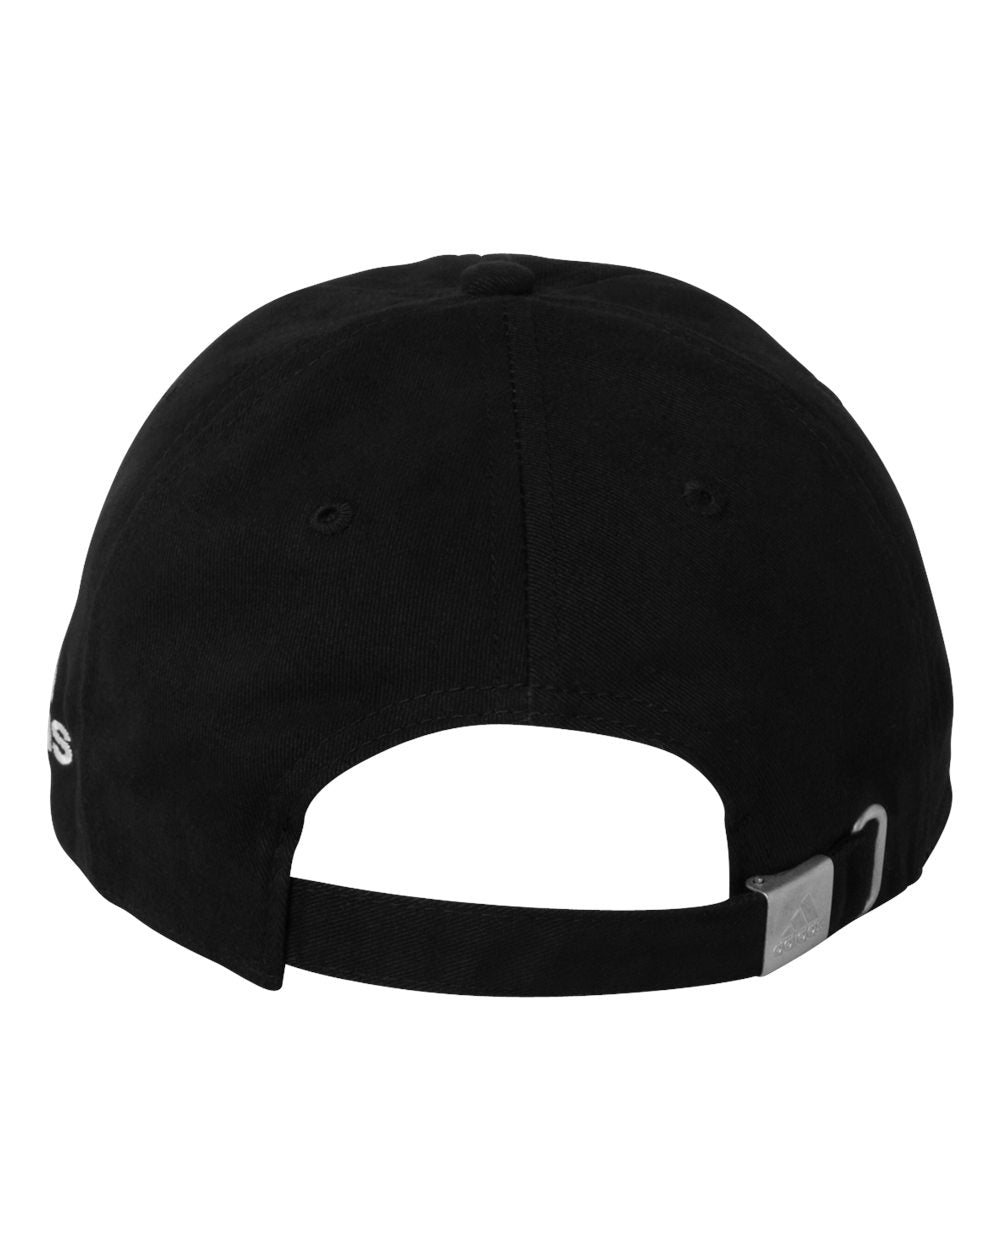 Adidas - Core Performance Relaxed Cap